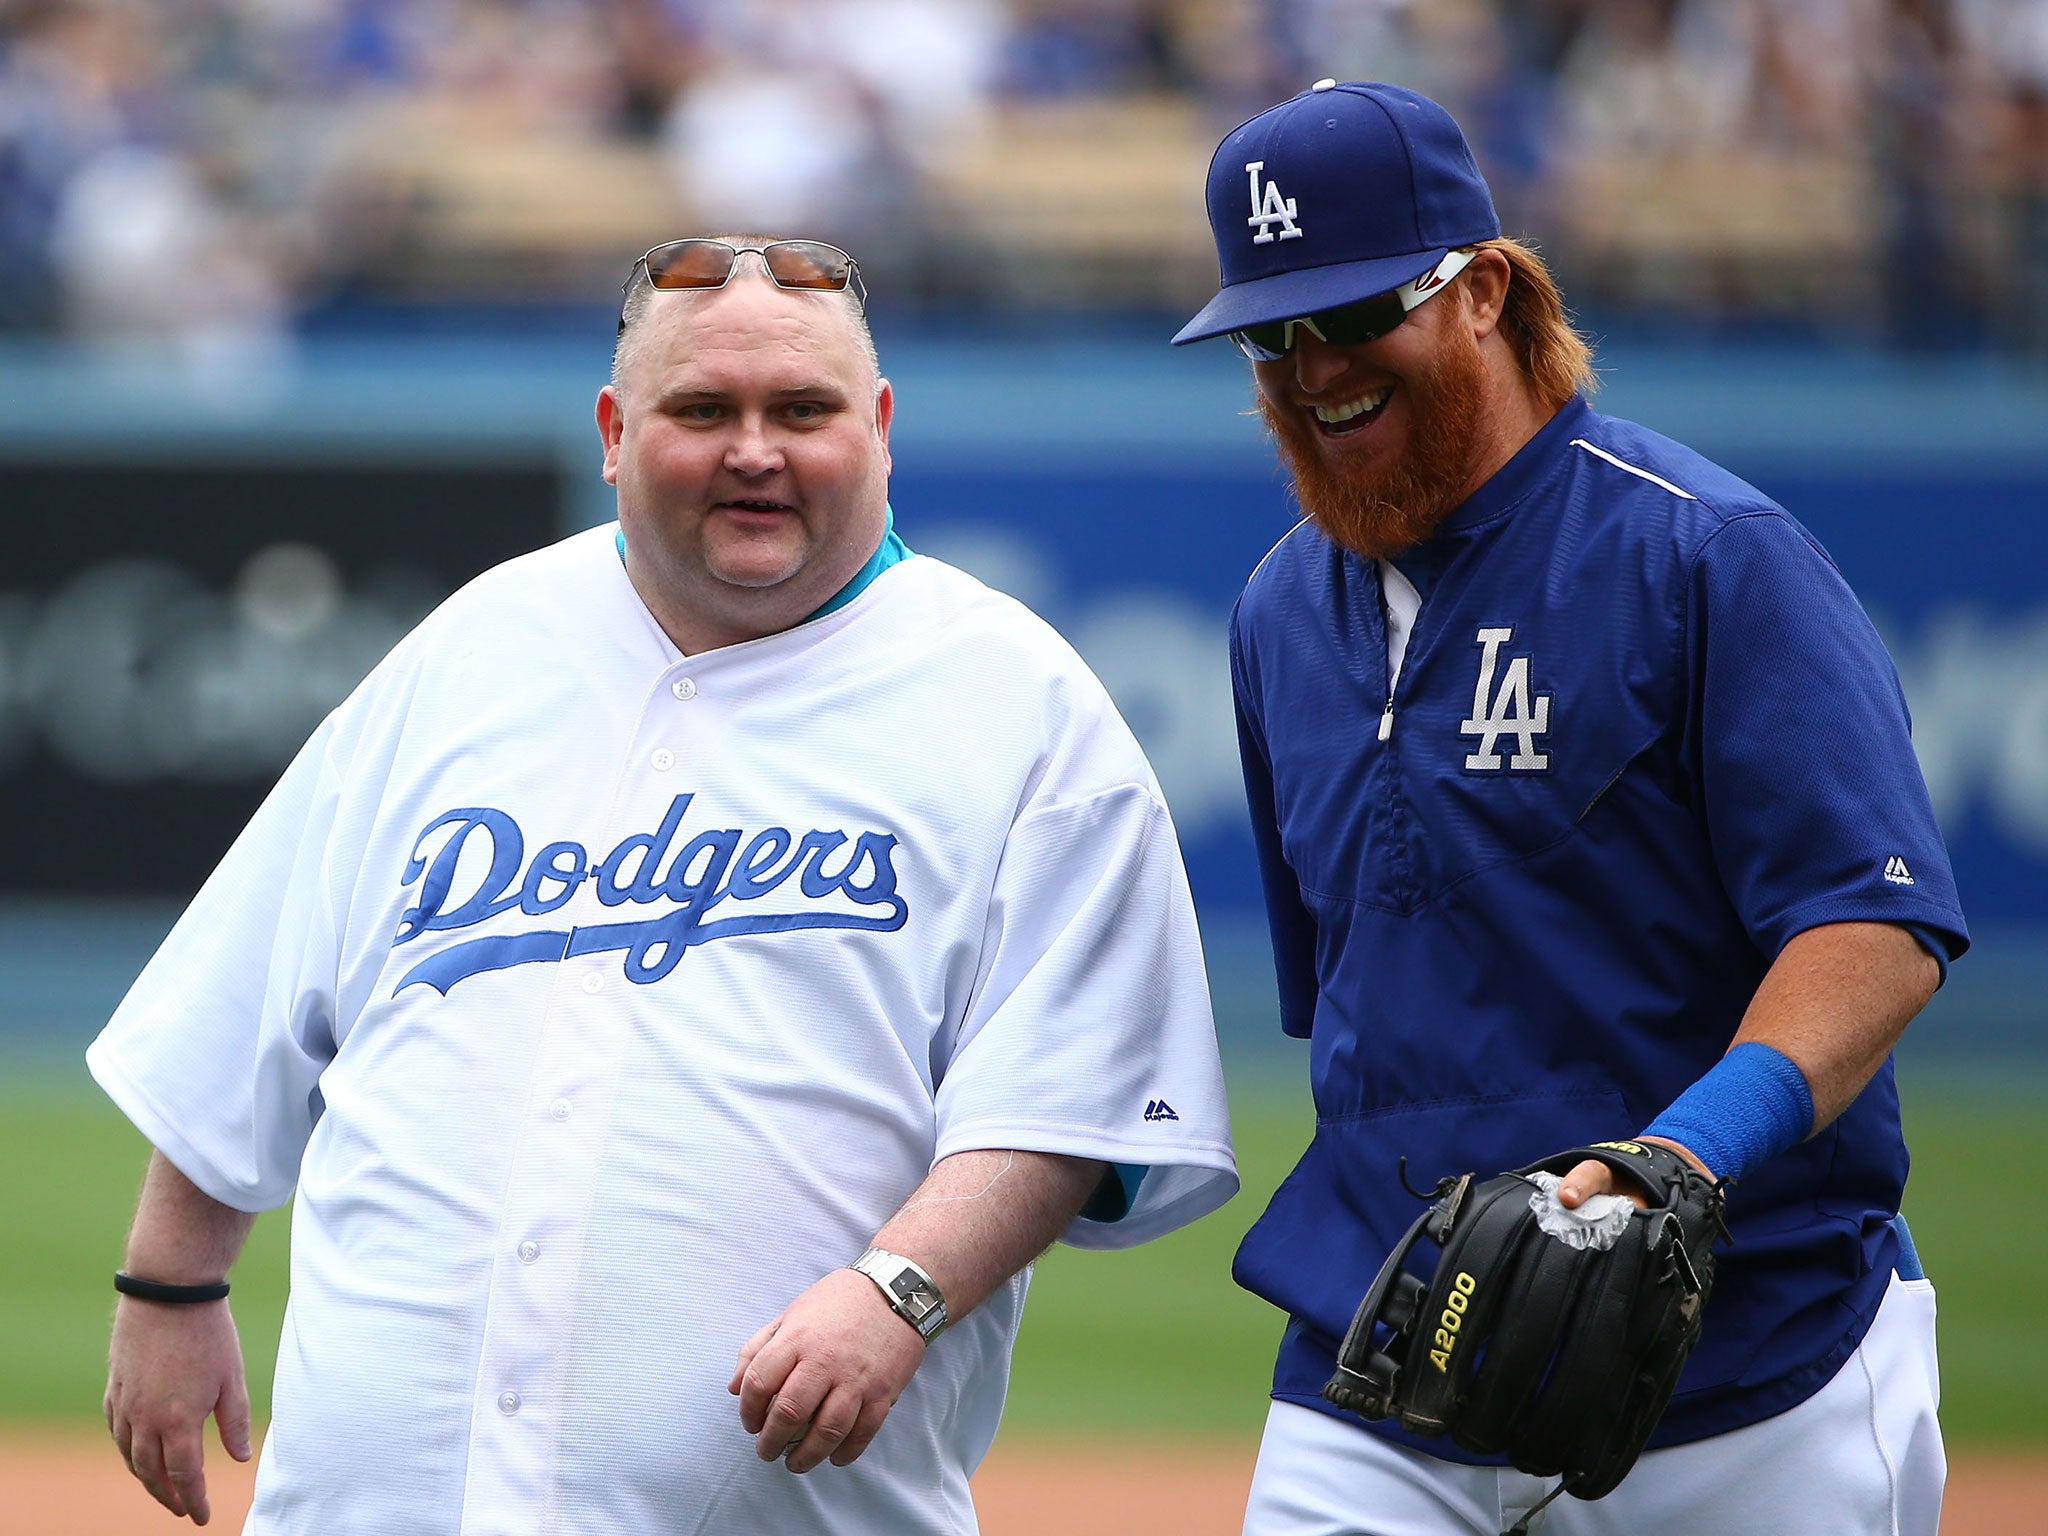 Sean O'Brien, aka Dancing Man, and Justin Turner #10 of the Los Angeles Dodgers walk back to home plate after posing for a photo